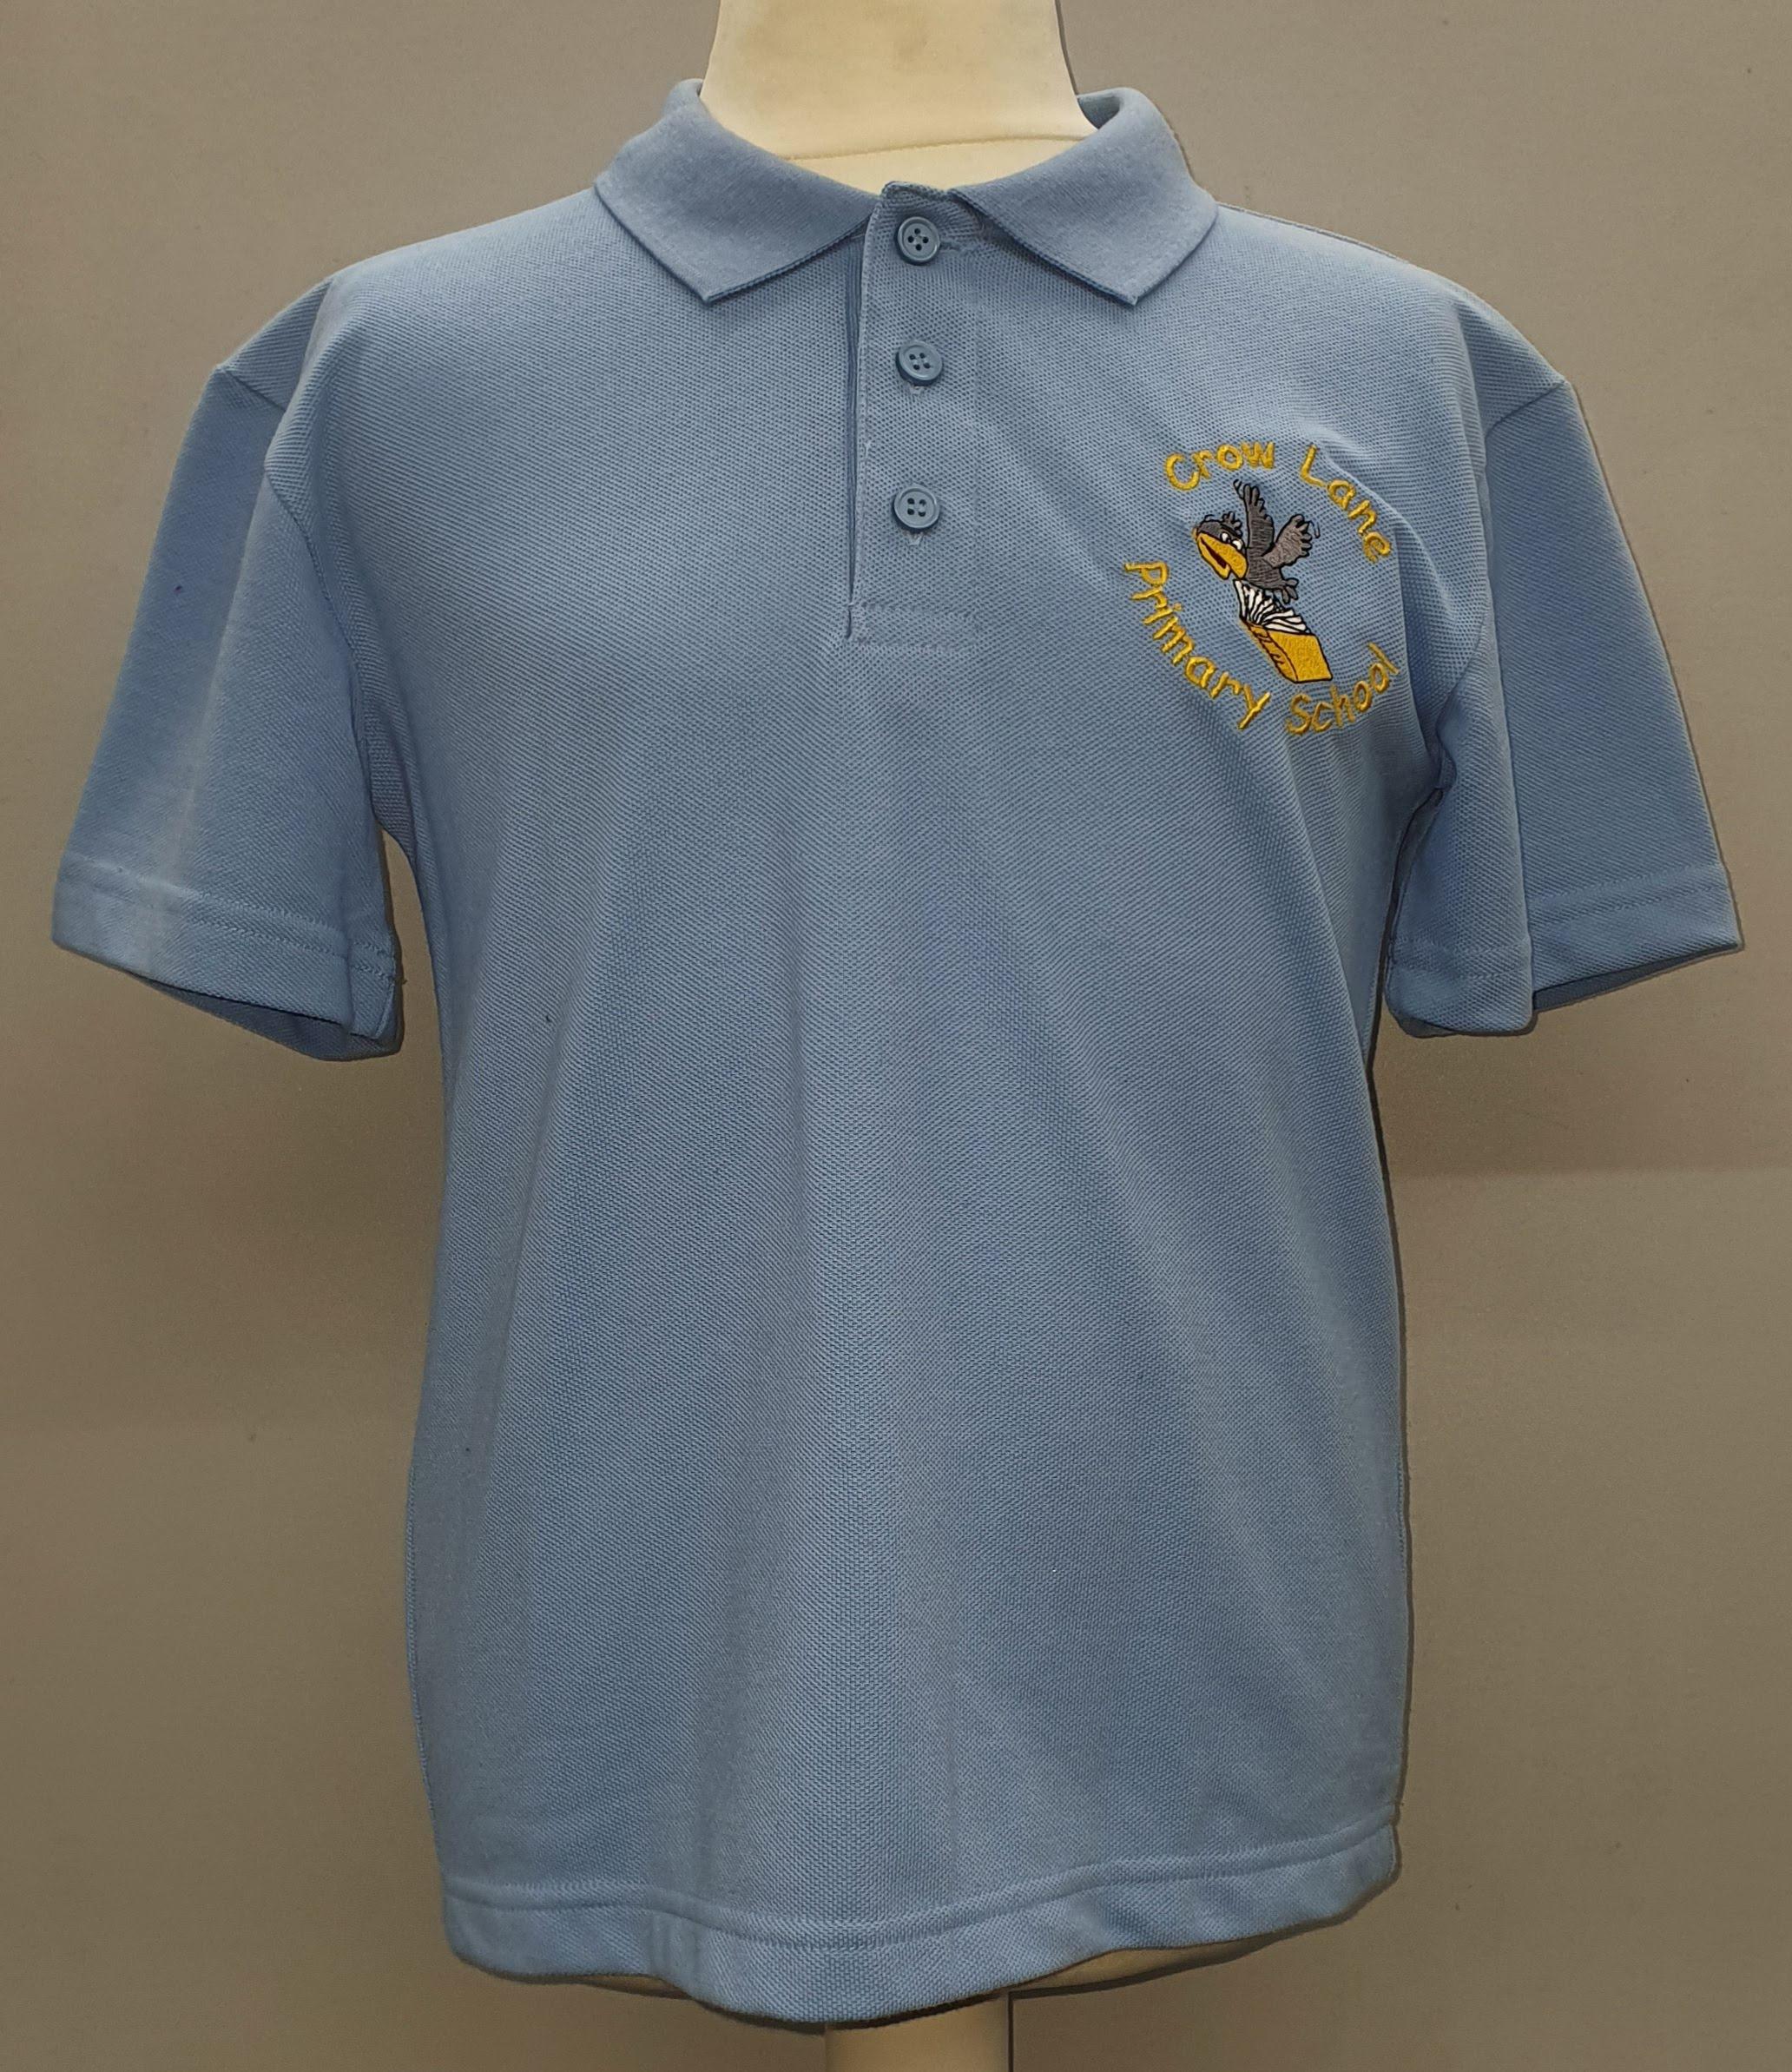 Crow Lane Primary and Foundation School Polo Shirt